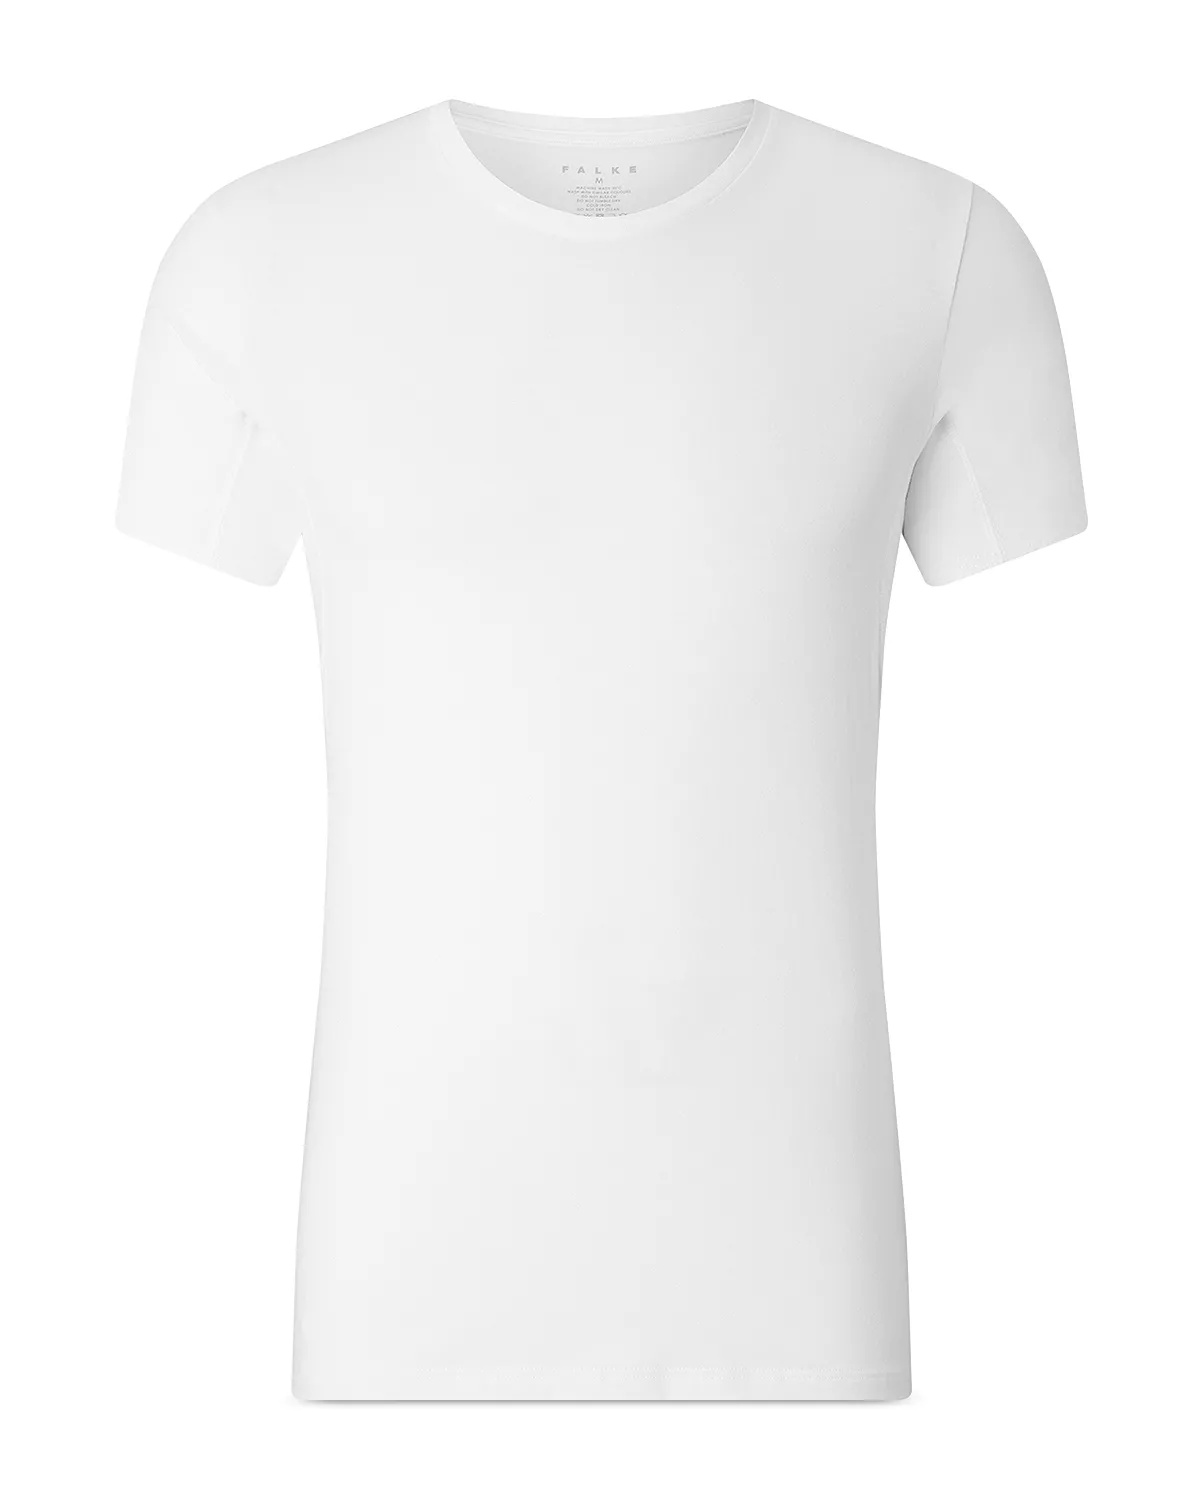 Outlast Climate Control Undershirt - 7